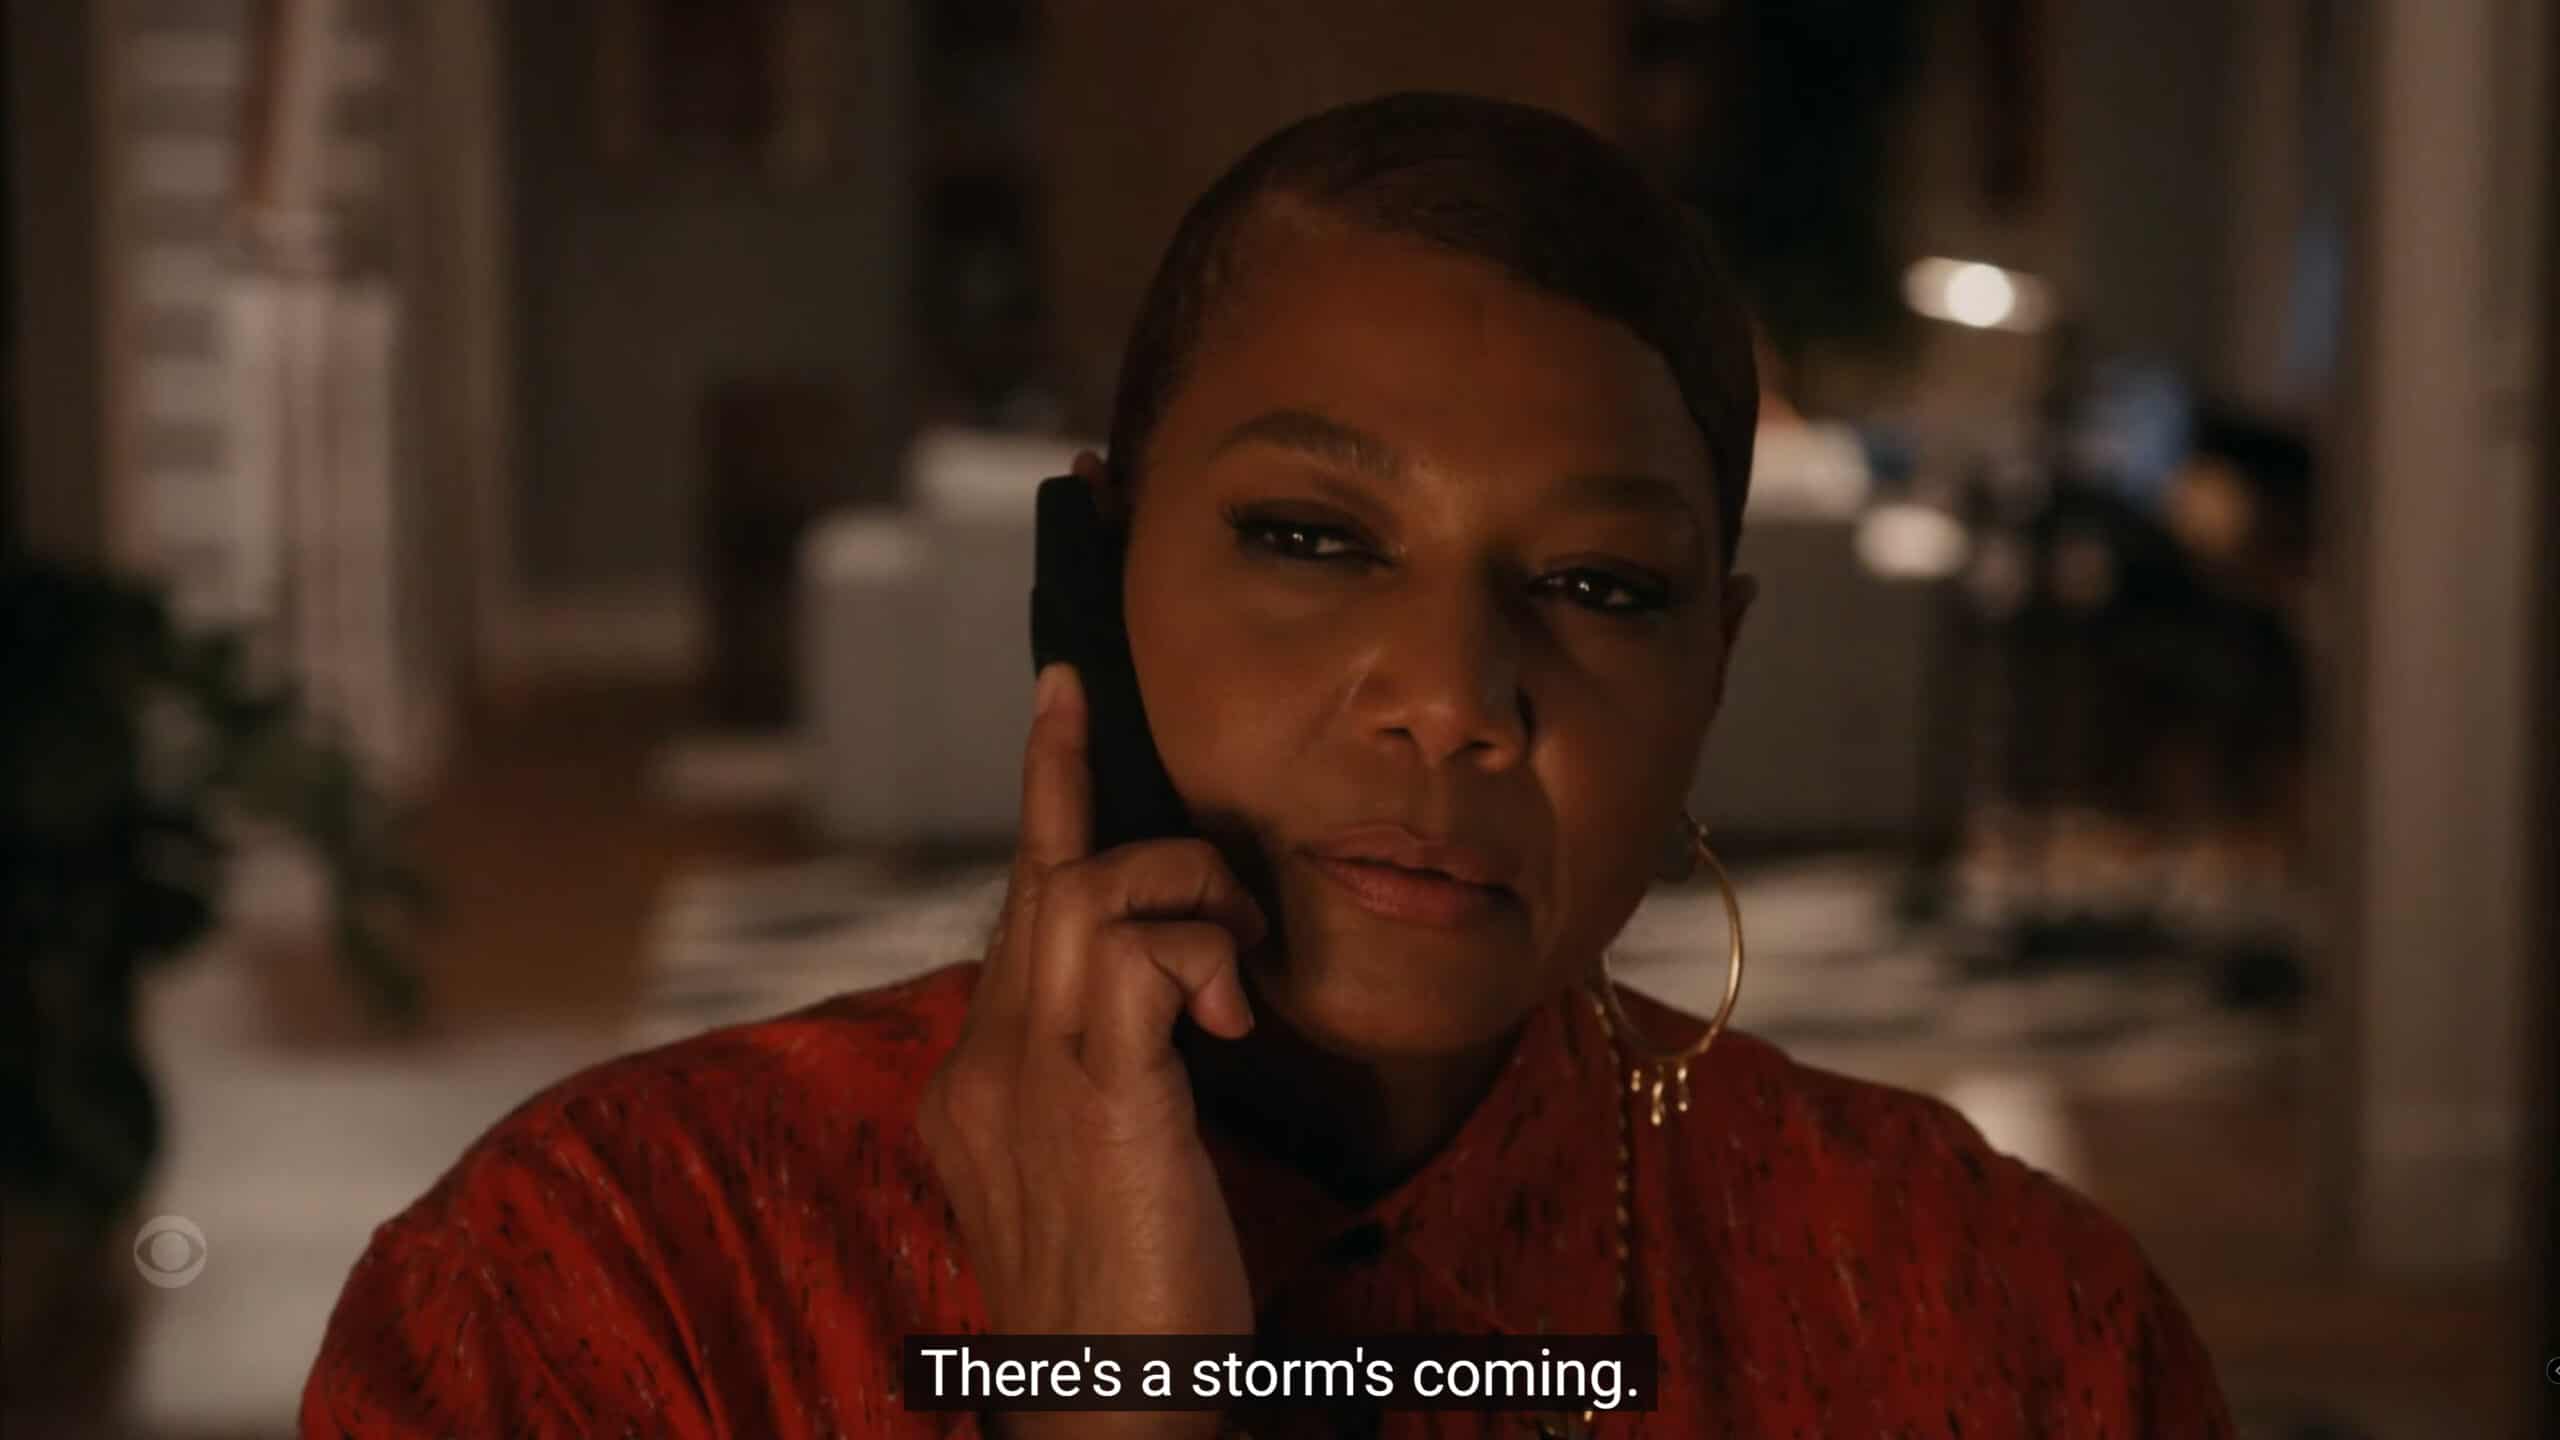 Queen Latifah as Robyn hearing from Fisk that trouble is coming